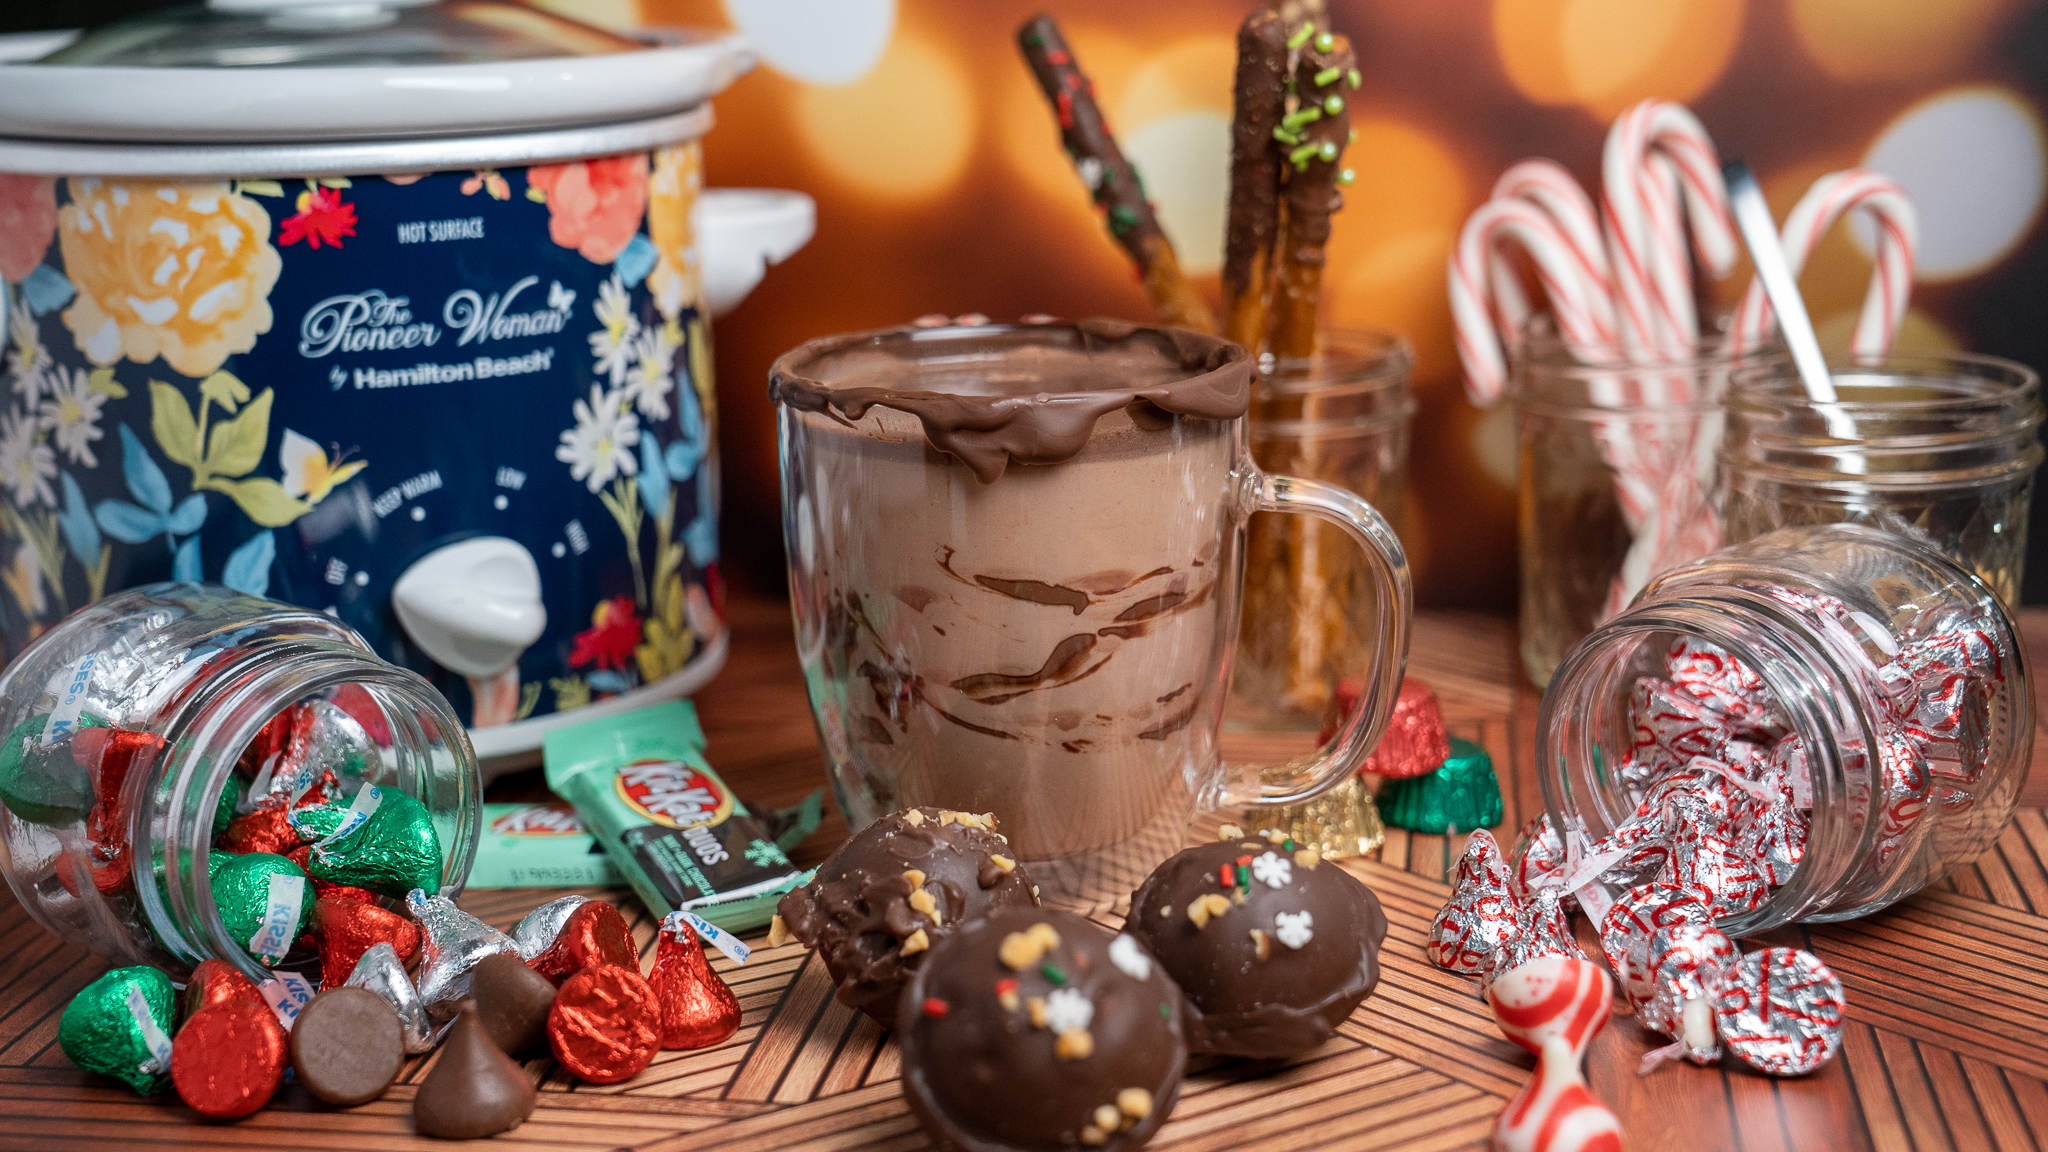 Get the recipe for hot cocoa bombs filled with holiday candy in the video description. 